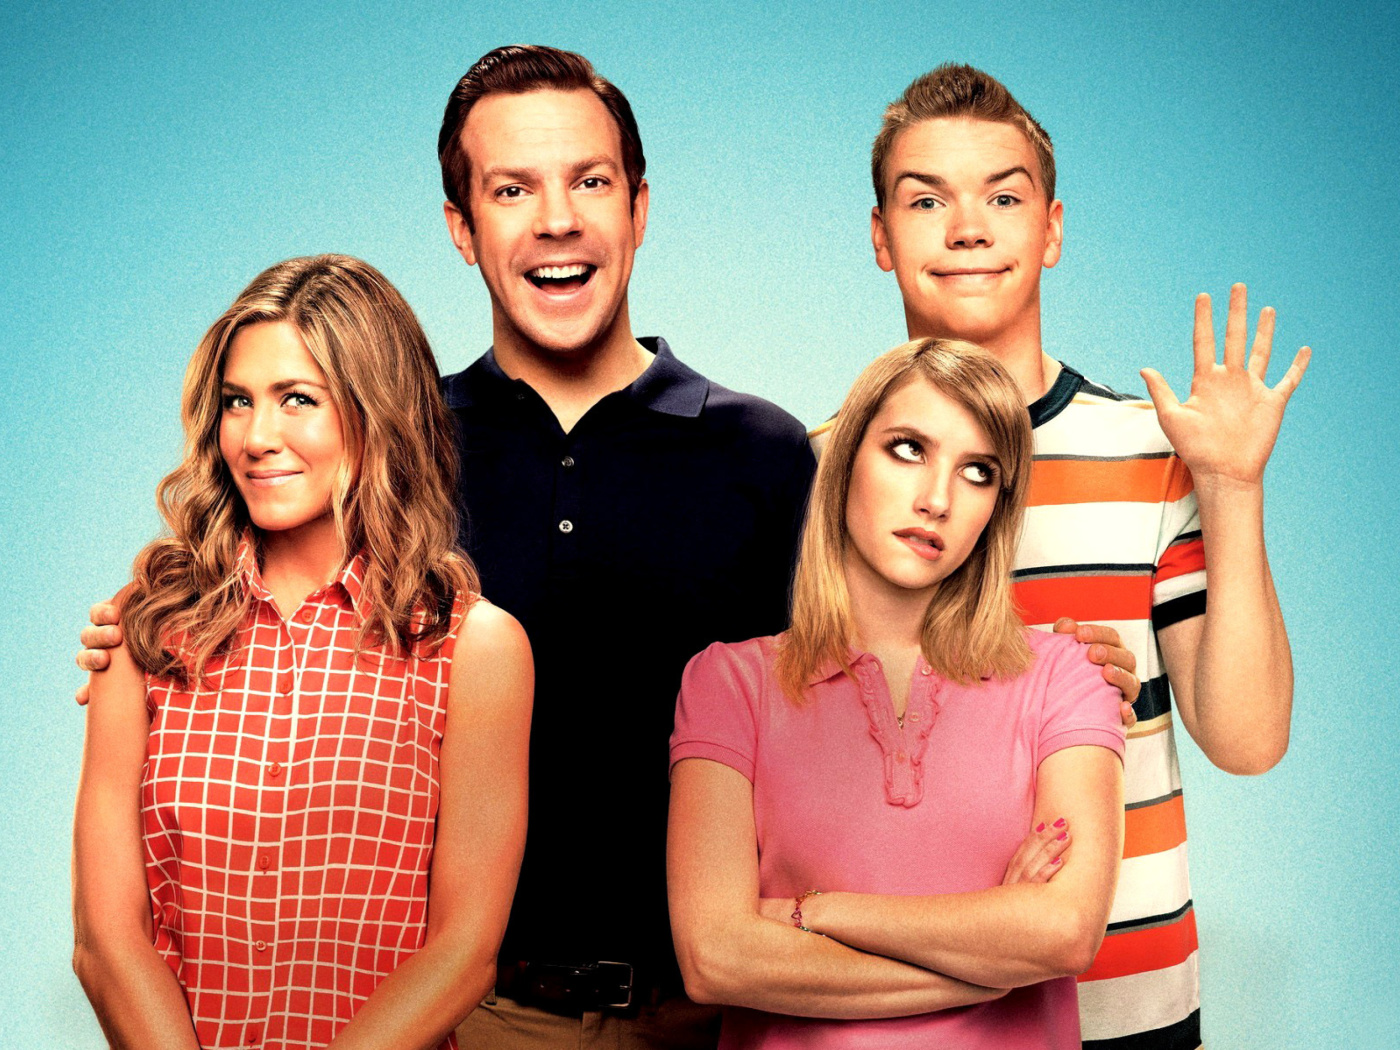 We are the Millers wallpaper 1400x1050